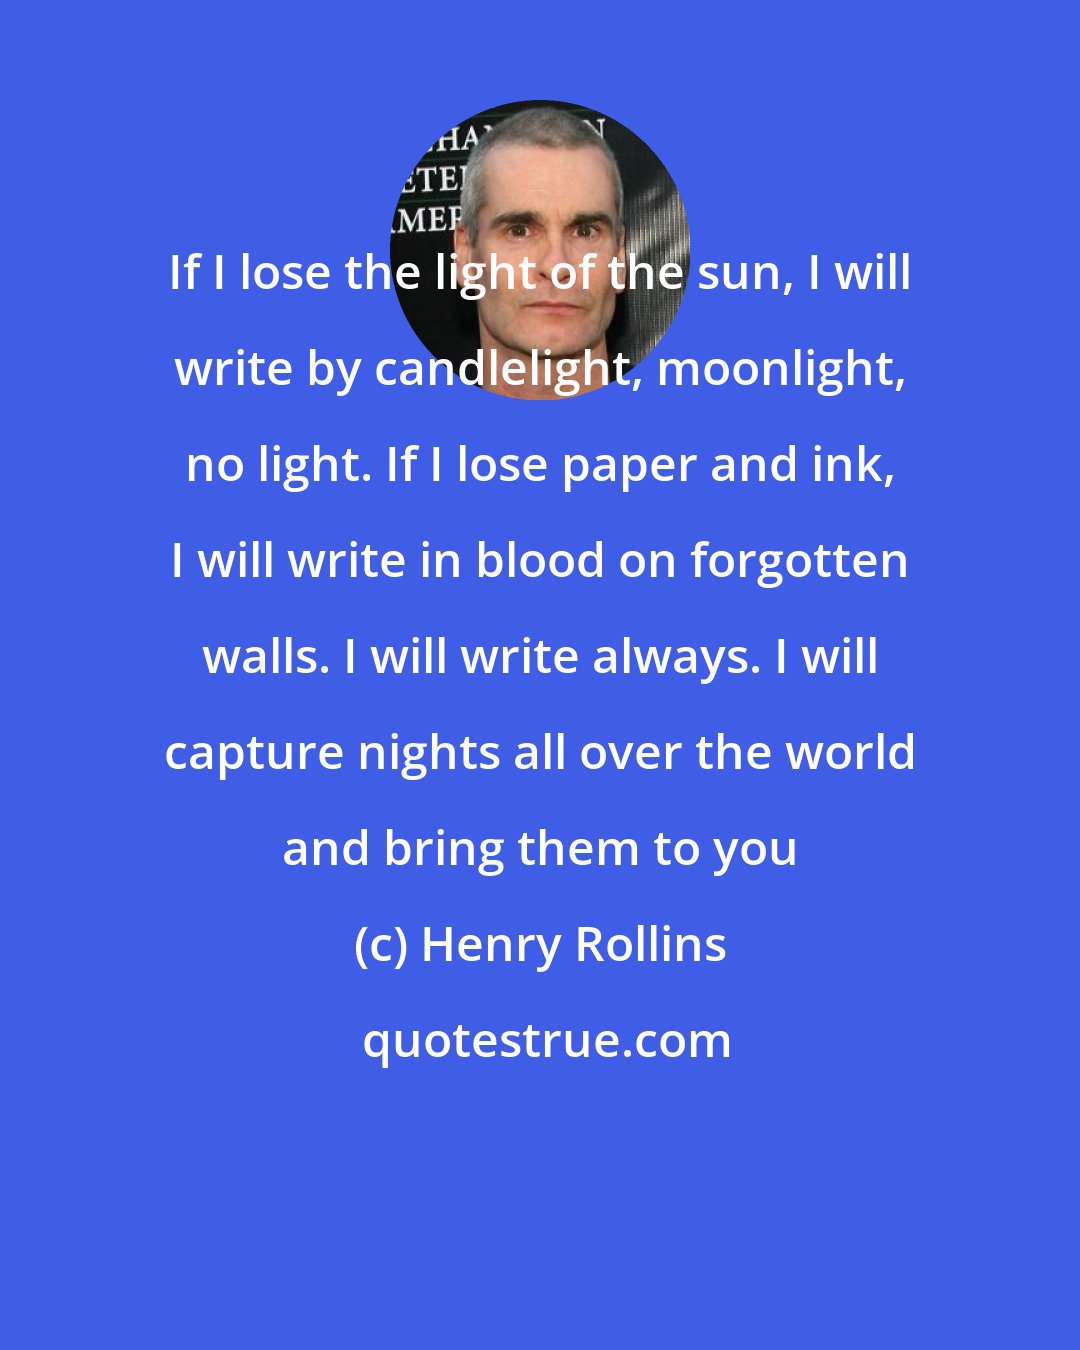 Henry Rollins: If I lose the light of the sun, I will write by candlelight, moonlight, no light. If I lose paper and ink, I will write in blood on forgotten walls. I will write always. I will capture nights all over the world and bring them to you